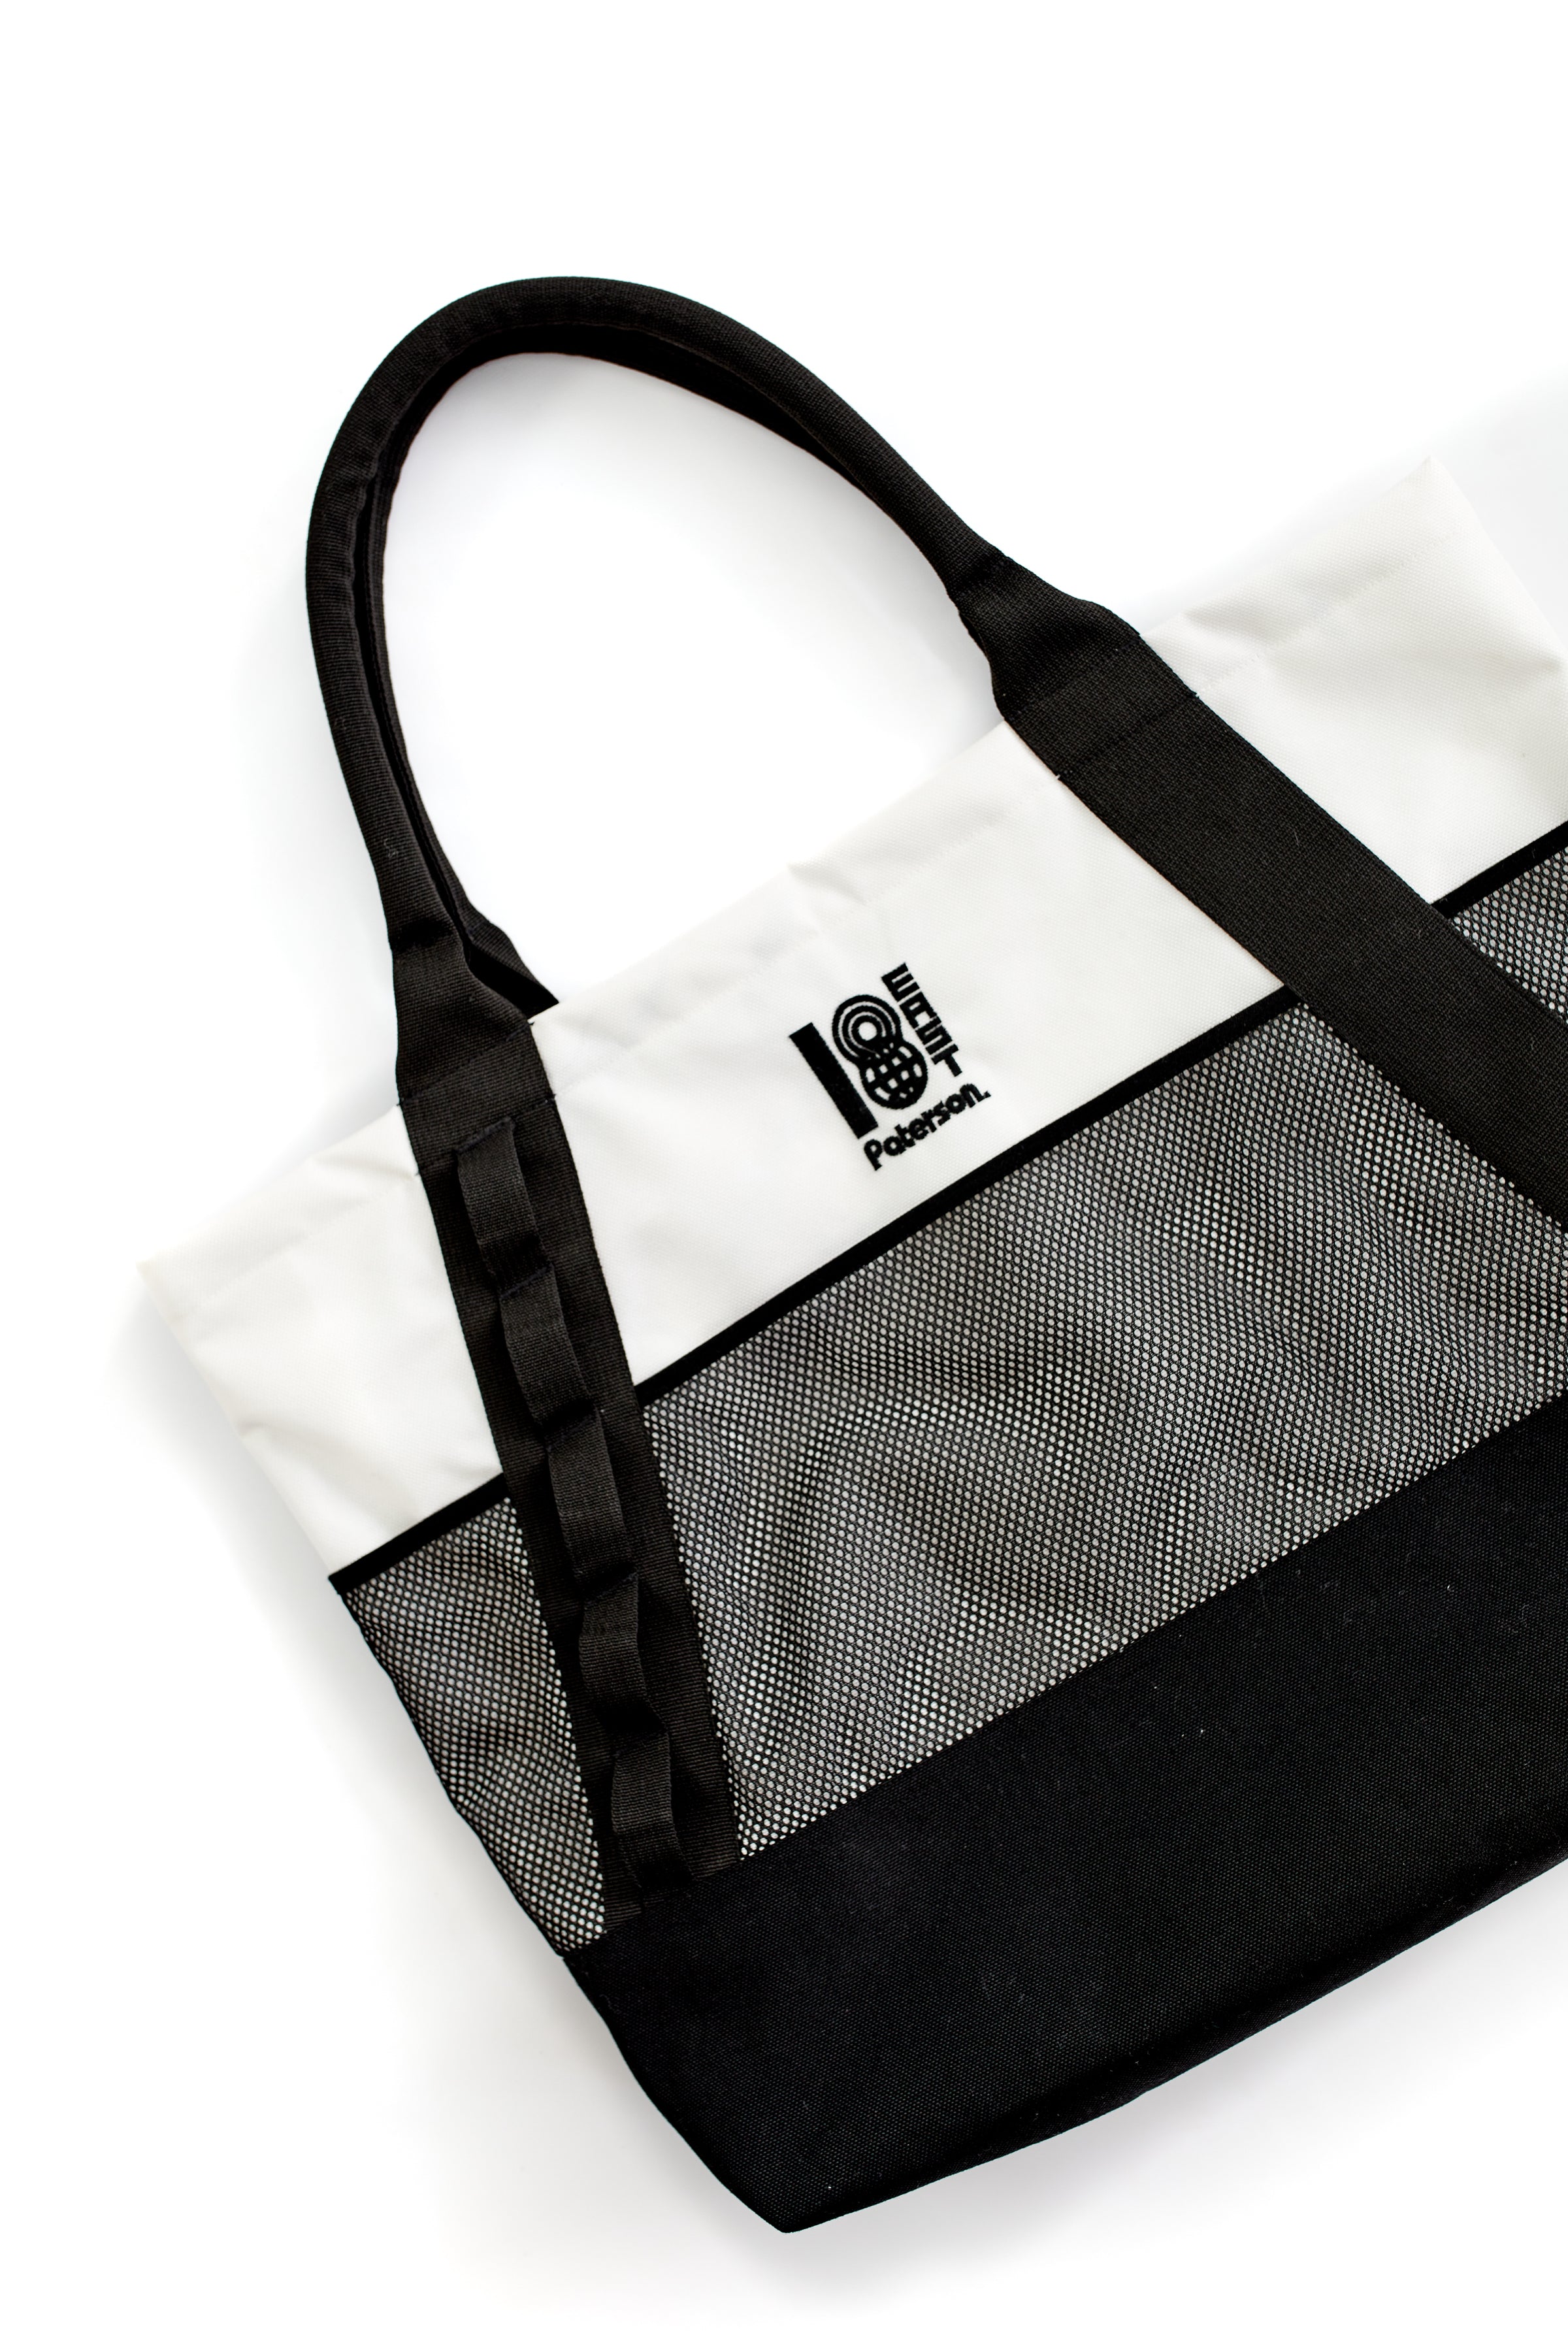 ANTHONY CARRYALL TOTE - WHITE / BLACK 1000D WATER-REPELLENT BALLISTIC NYLON